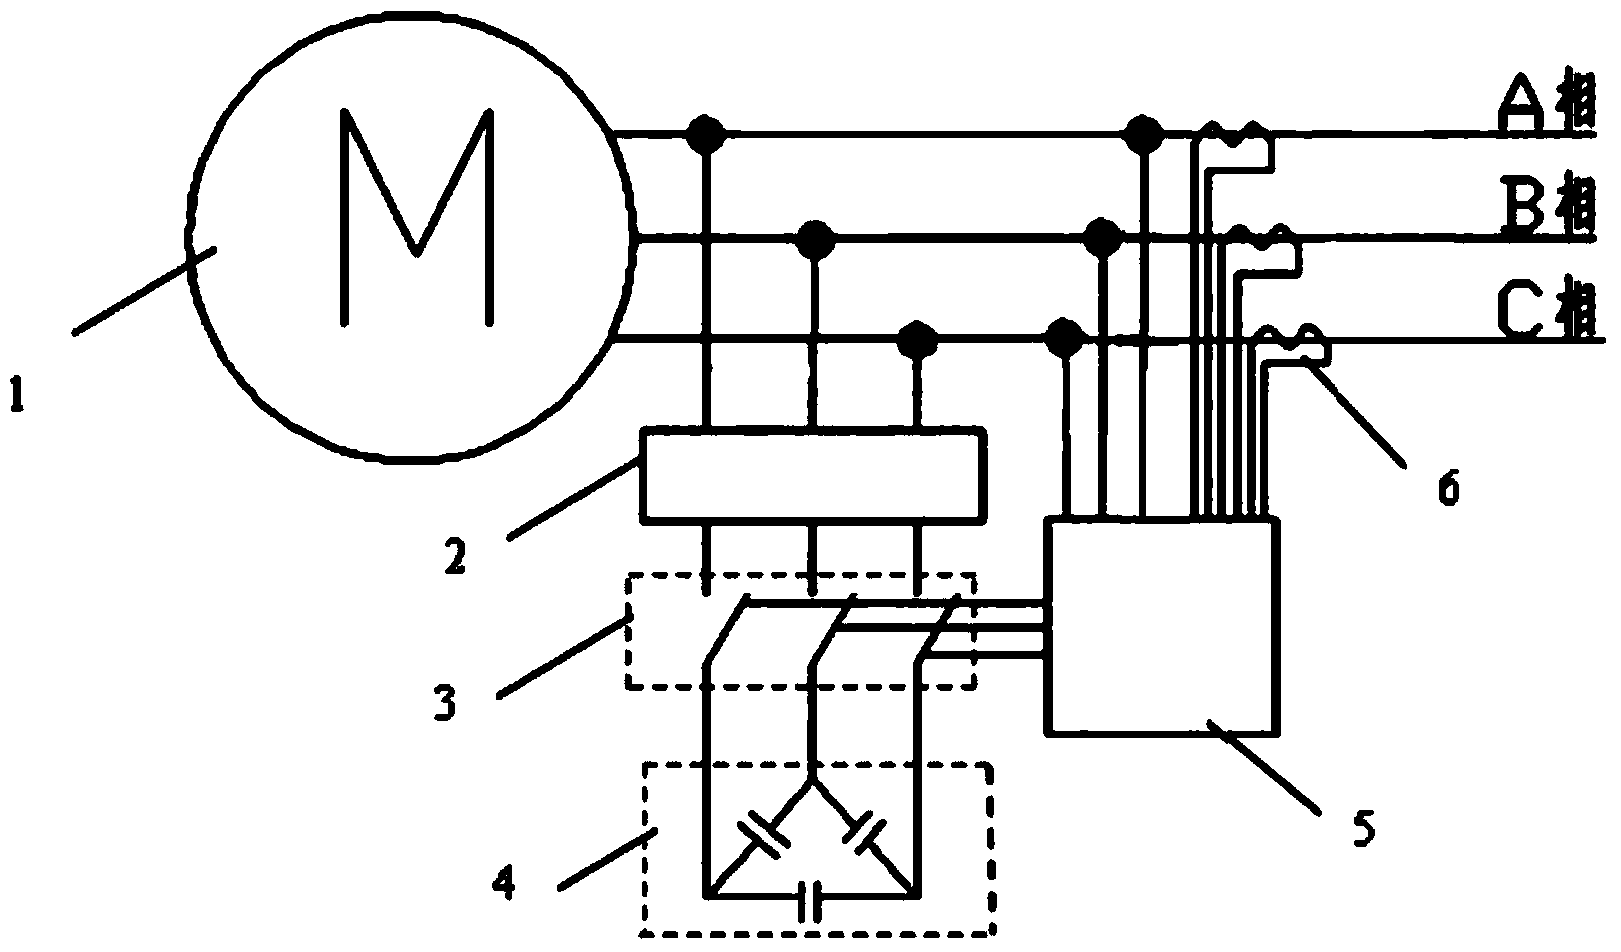 Reactive in-place intelligent compensation device for three-phase asynchronous motor